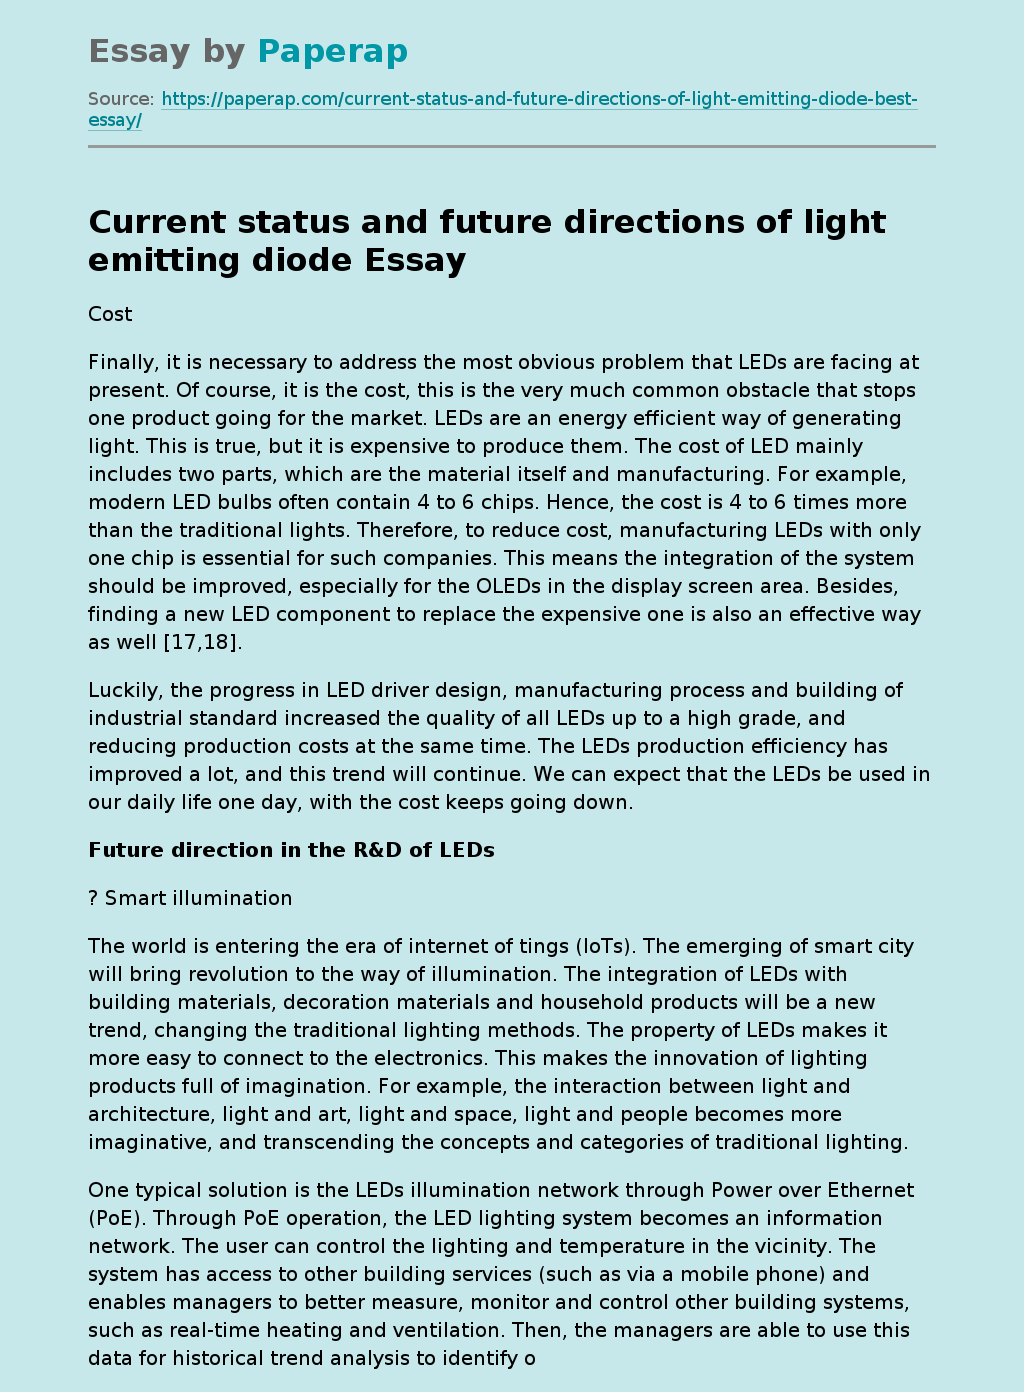 Current Status and Future Directions of Light Emitting Diode